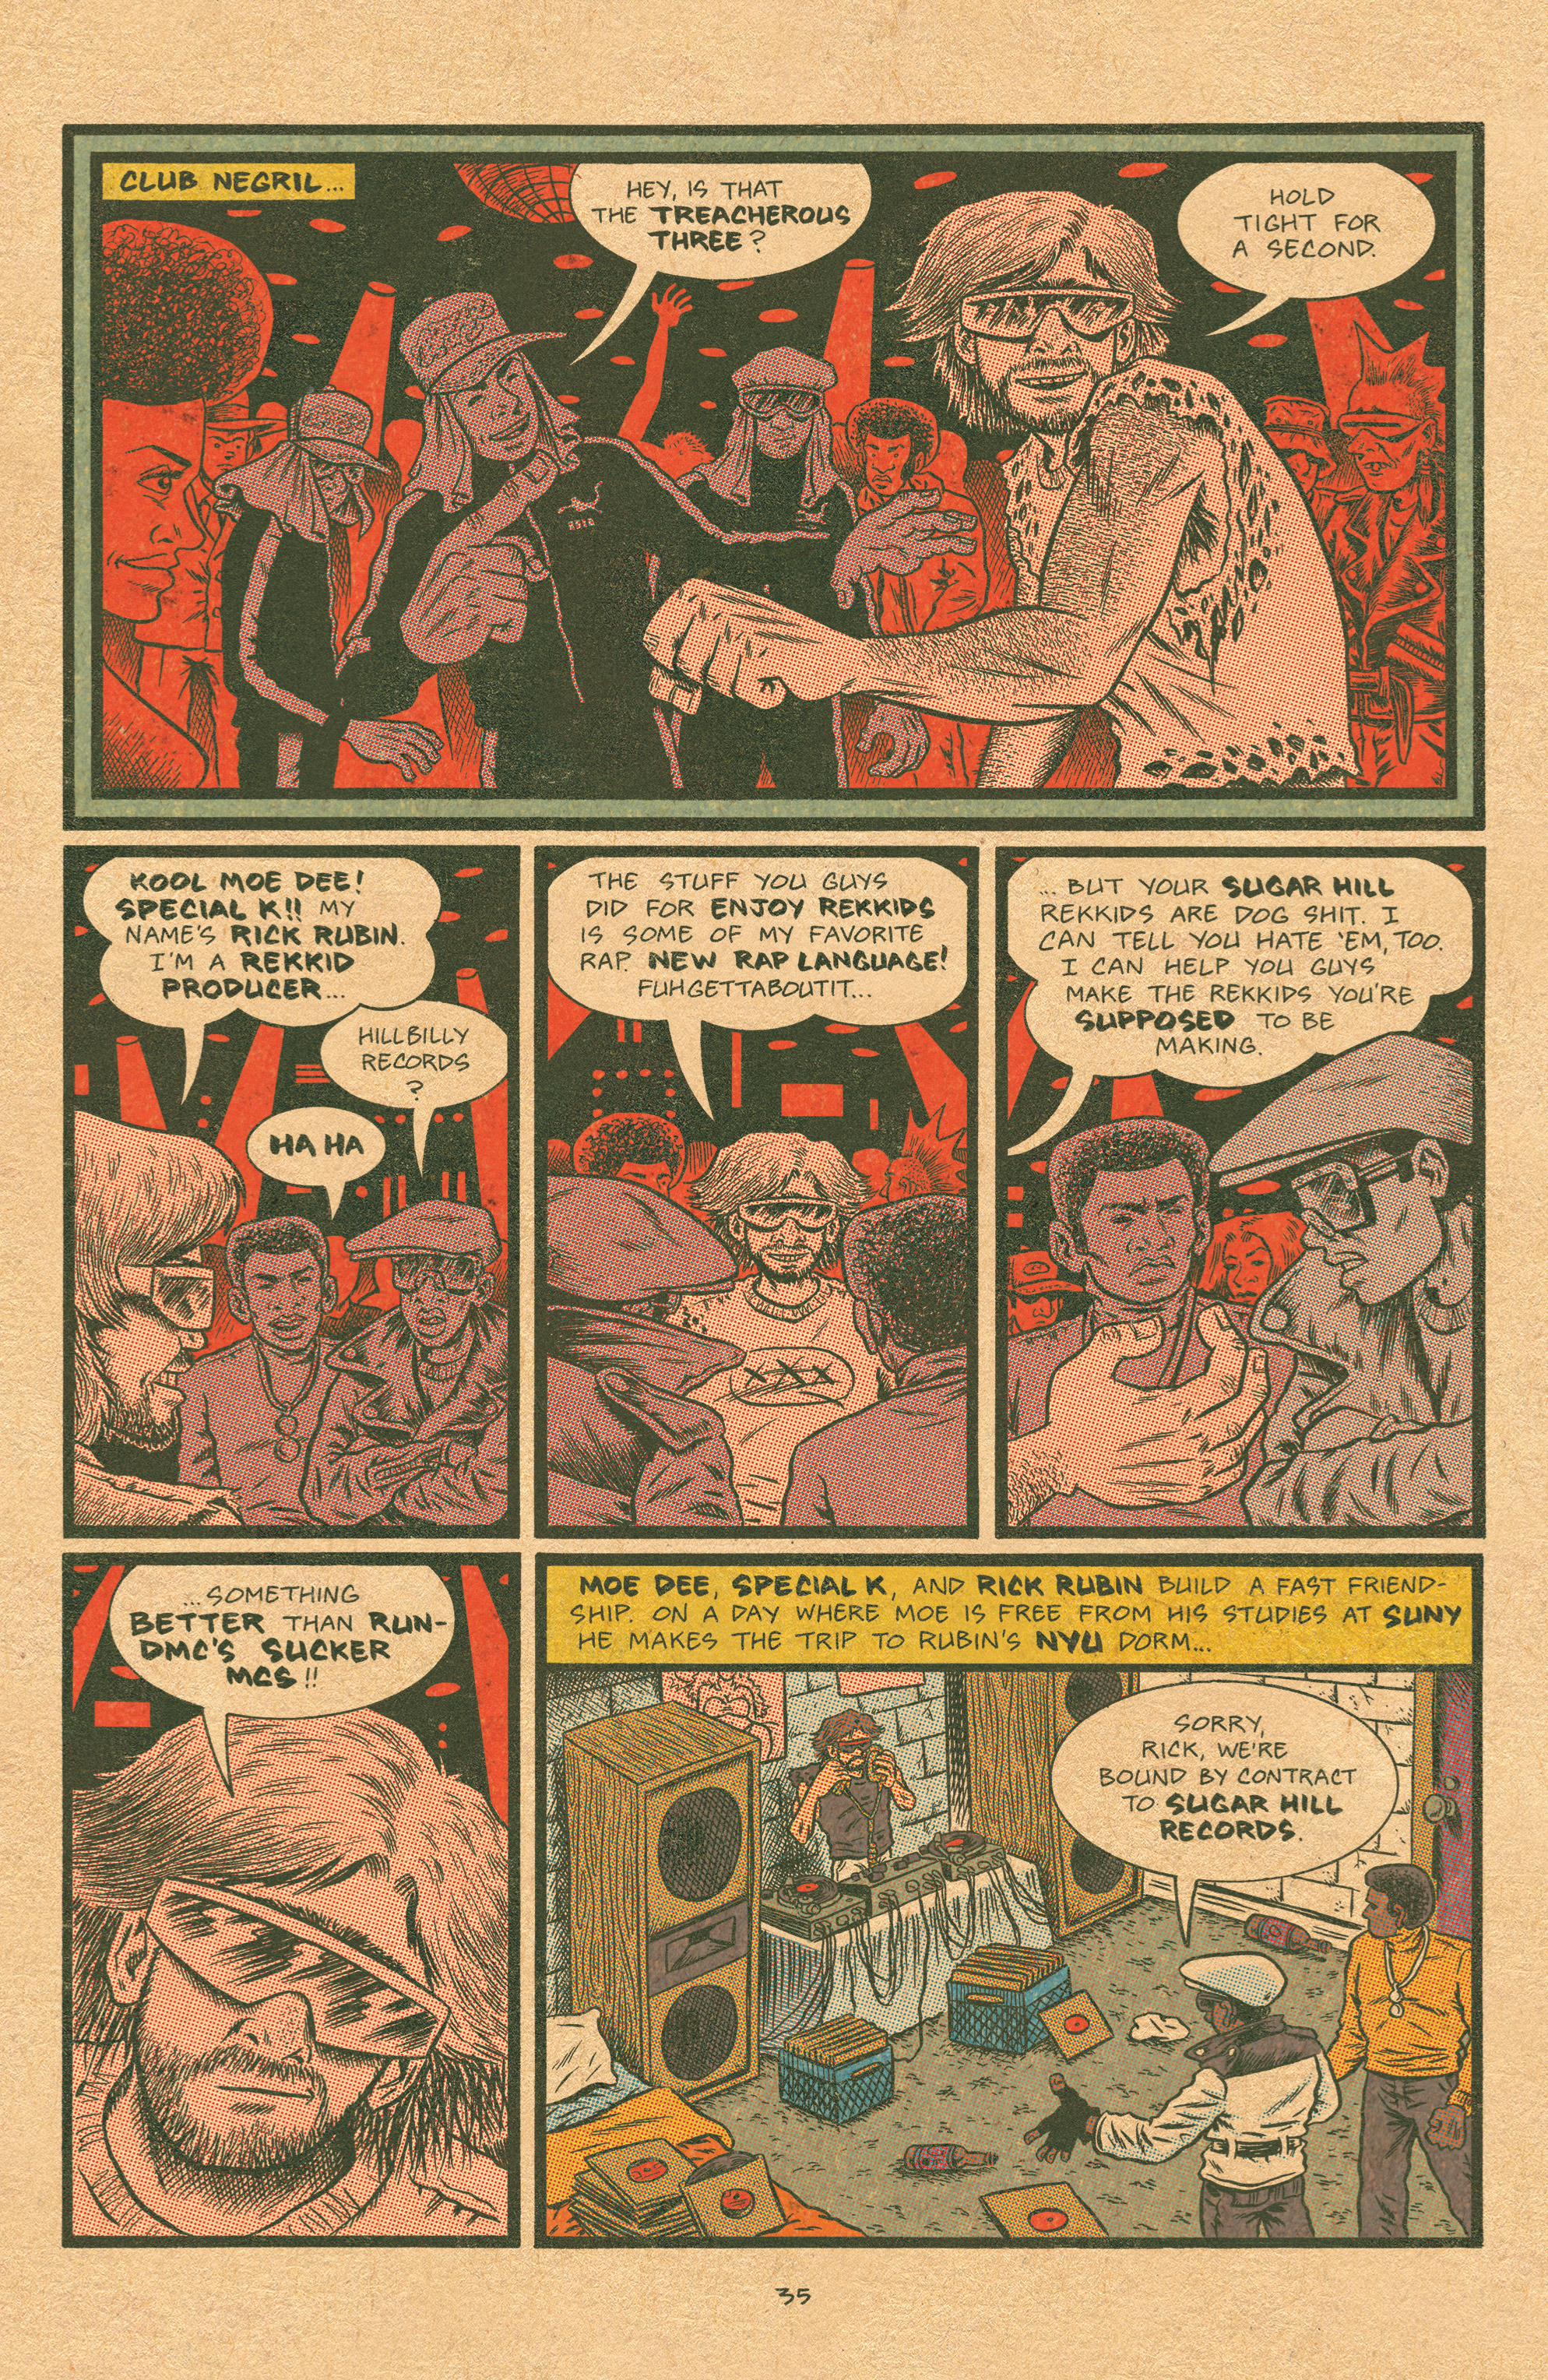 Read online Free Comic Book Day 2015 comic -  Issue # Hip Hop Family Tree Three-in-One - Featuring Cosplayers - 17